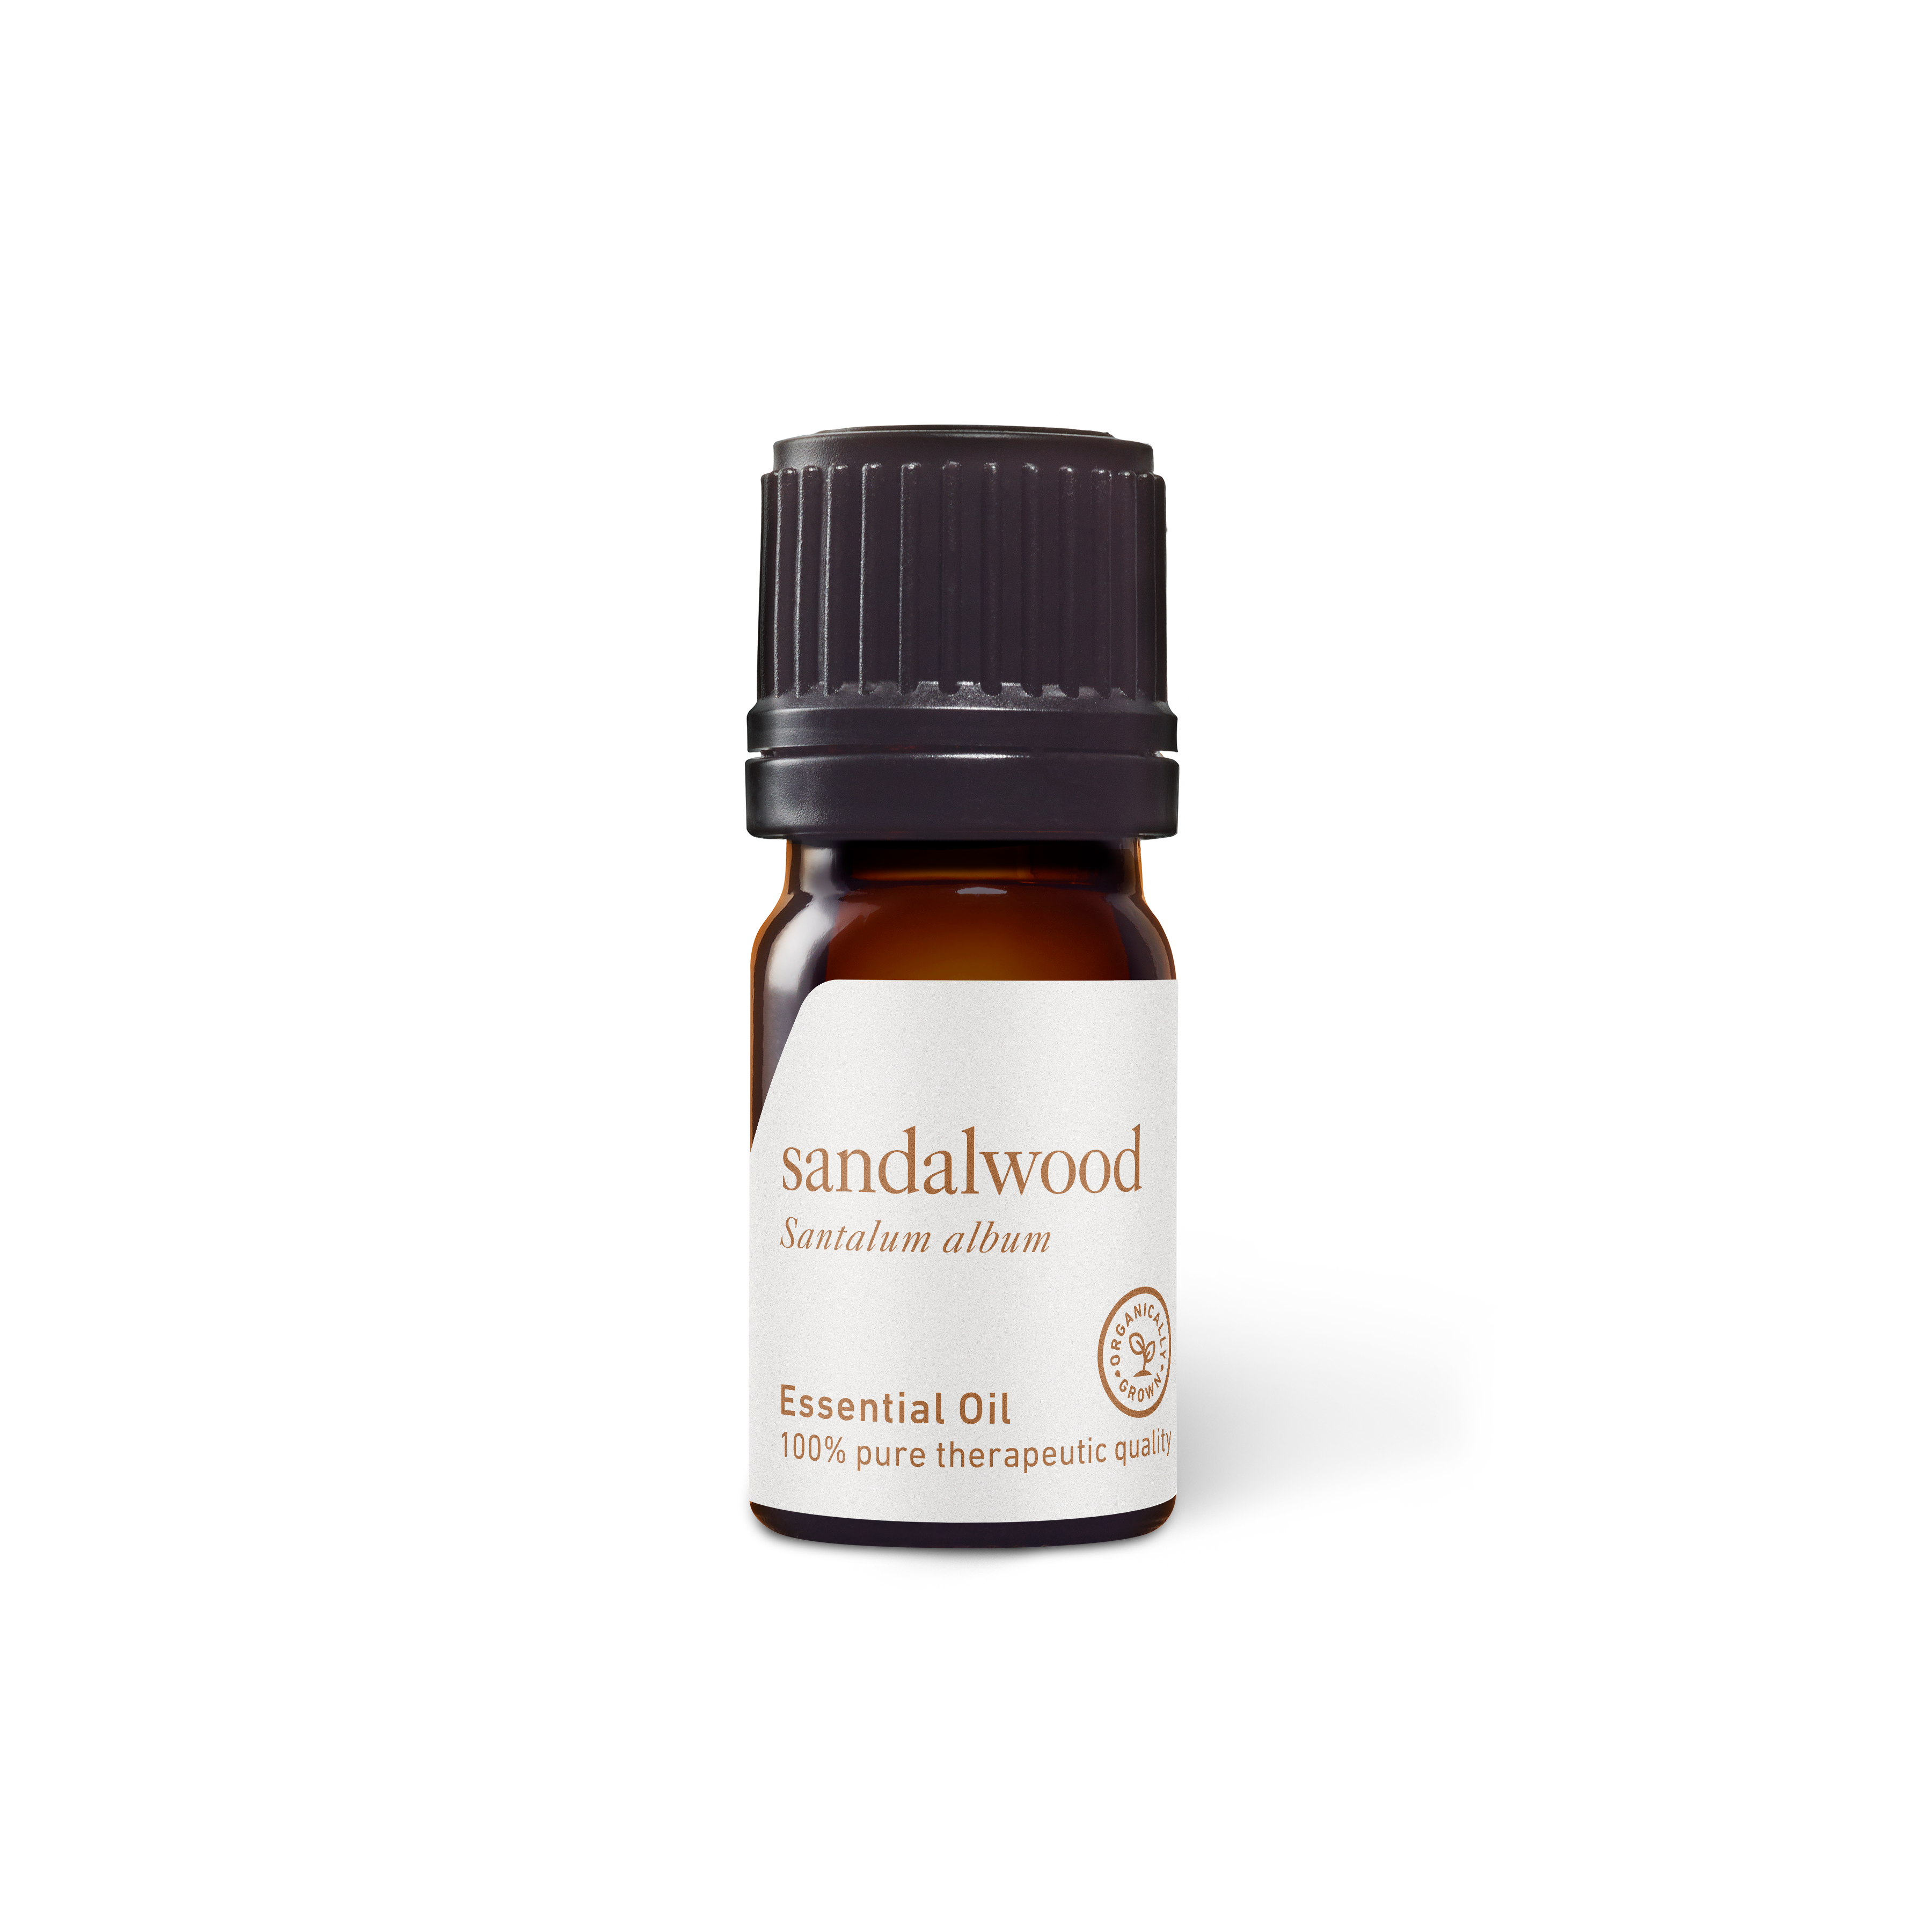 Plant Therapy Sandalwood Australian Essential Oil | 100% Pure, Undiluted, Natural Aromatherapy, Therapeutic Grade | 5 ml